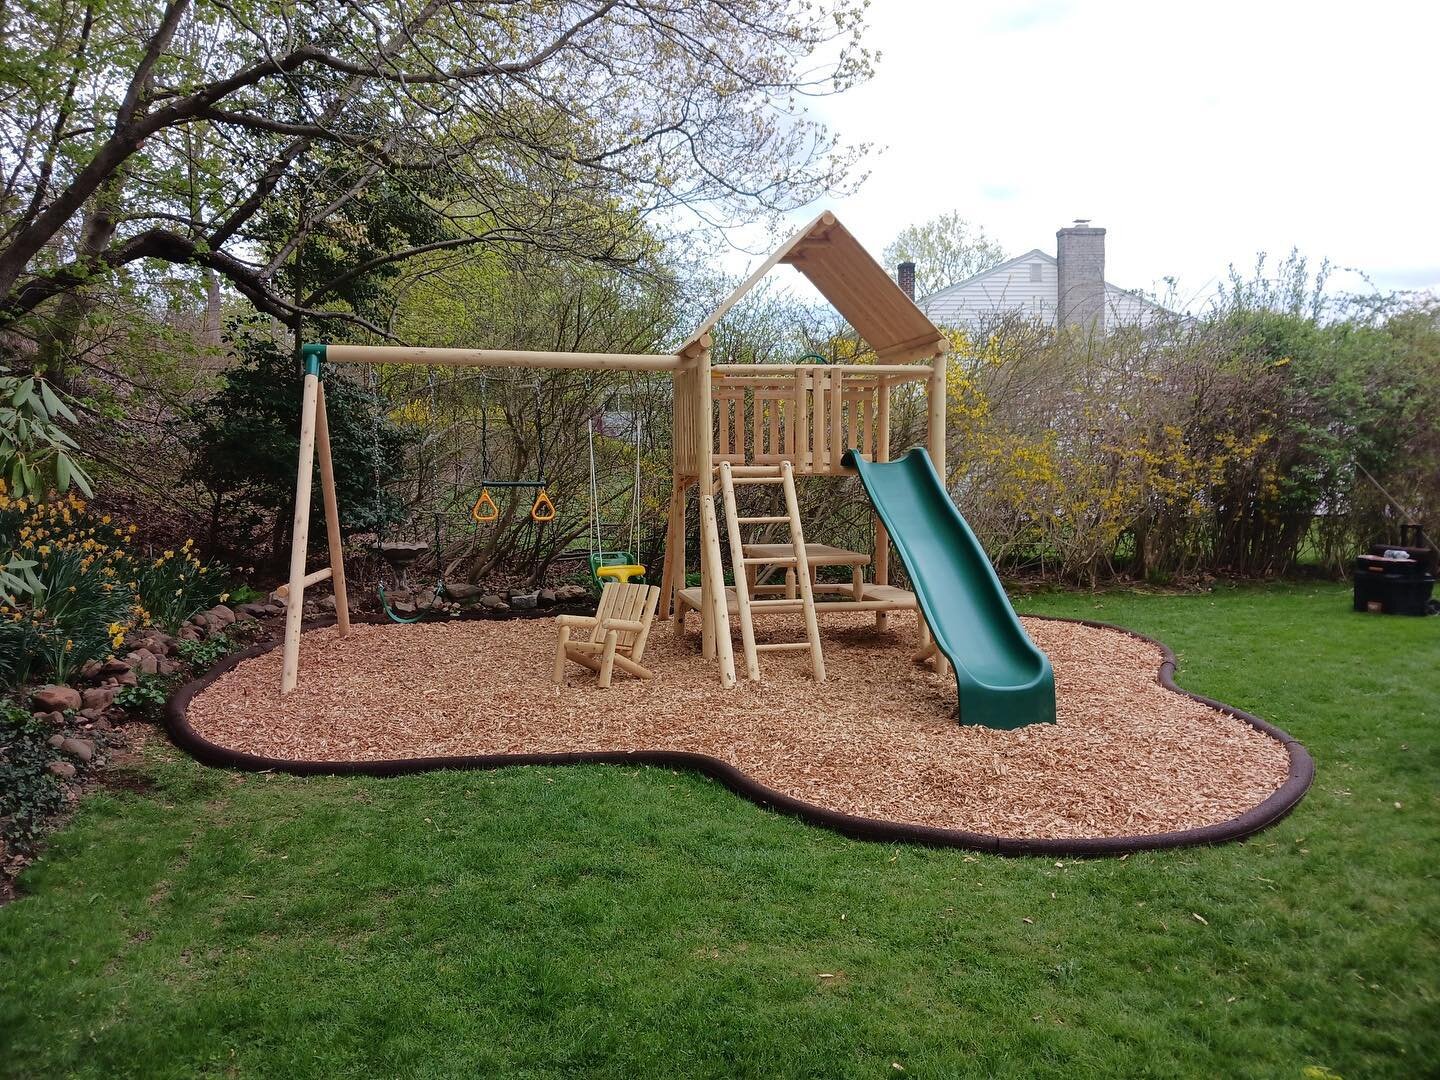 Absolutely stunning surface lines from one of our pros! 

- Premium Rubber Timber Border &amp; Premium Cedar Wood Fibers -

#cedarworksplayset #cedarworks #cedar #landscapephotography #landscaping #playscapedreams #playscape #spring #springhassprung 